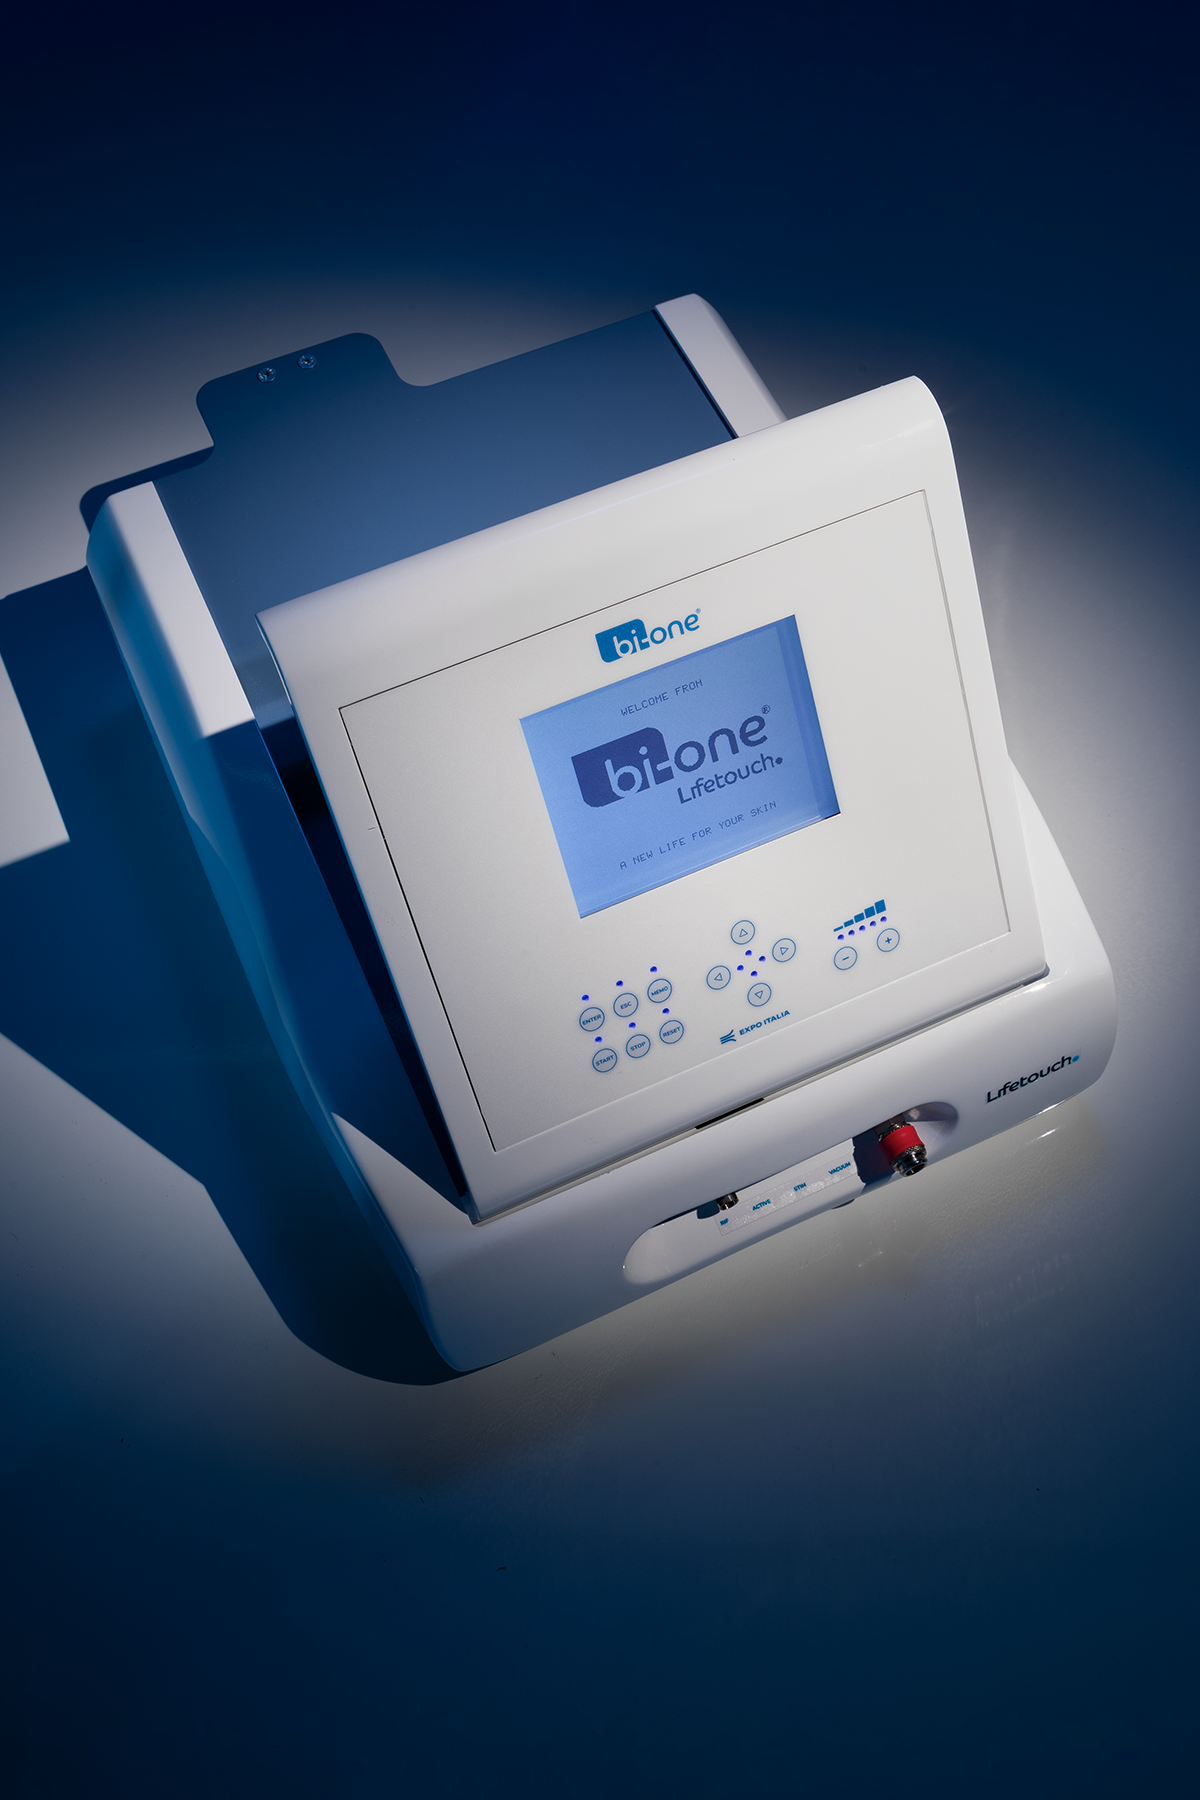 This is a product image of Bi-One LifeTouchTherapy.